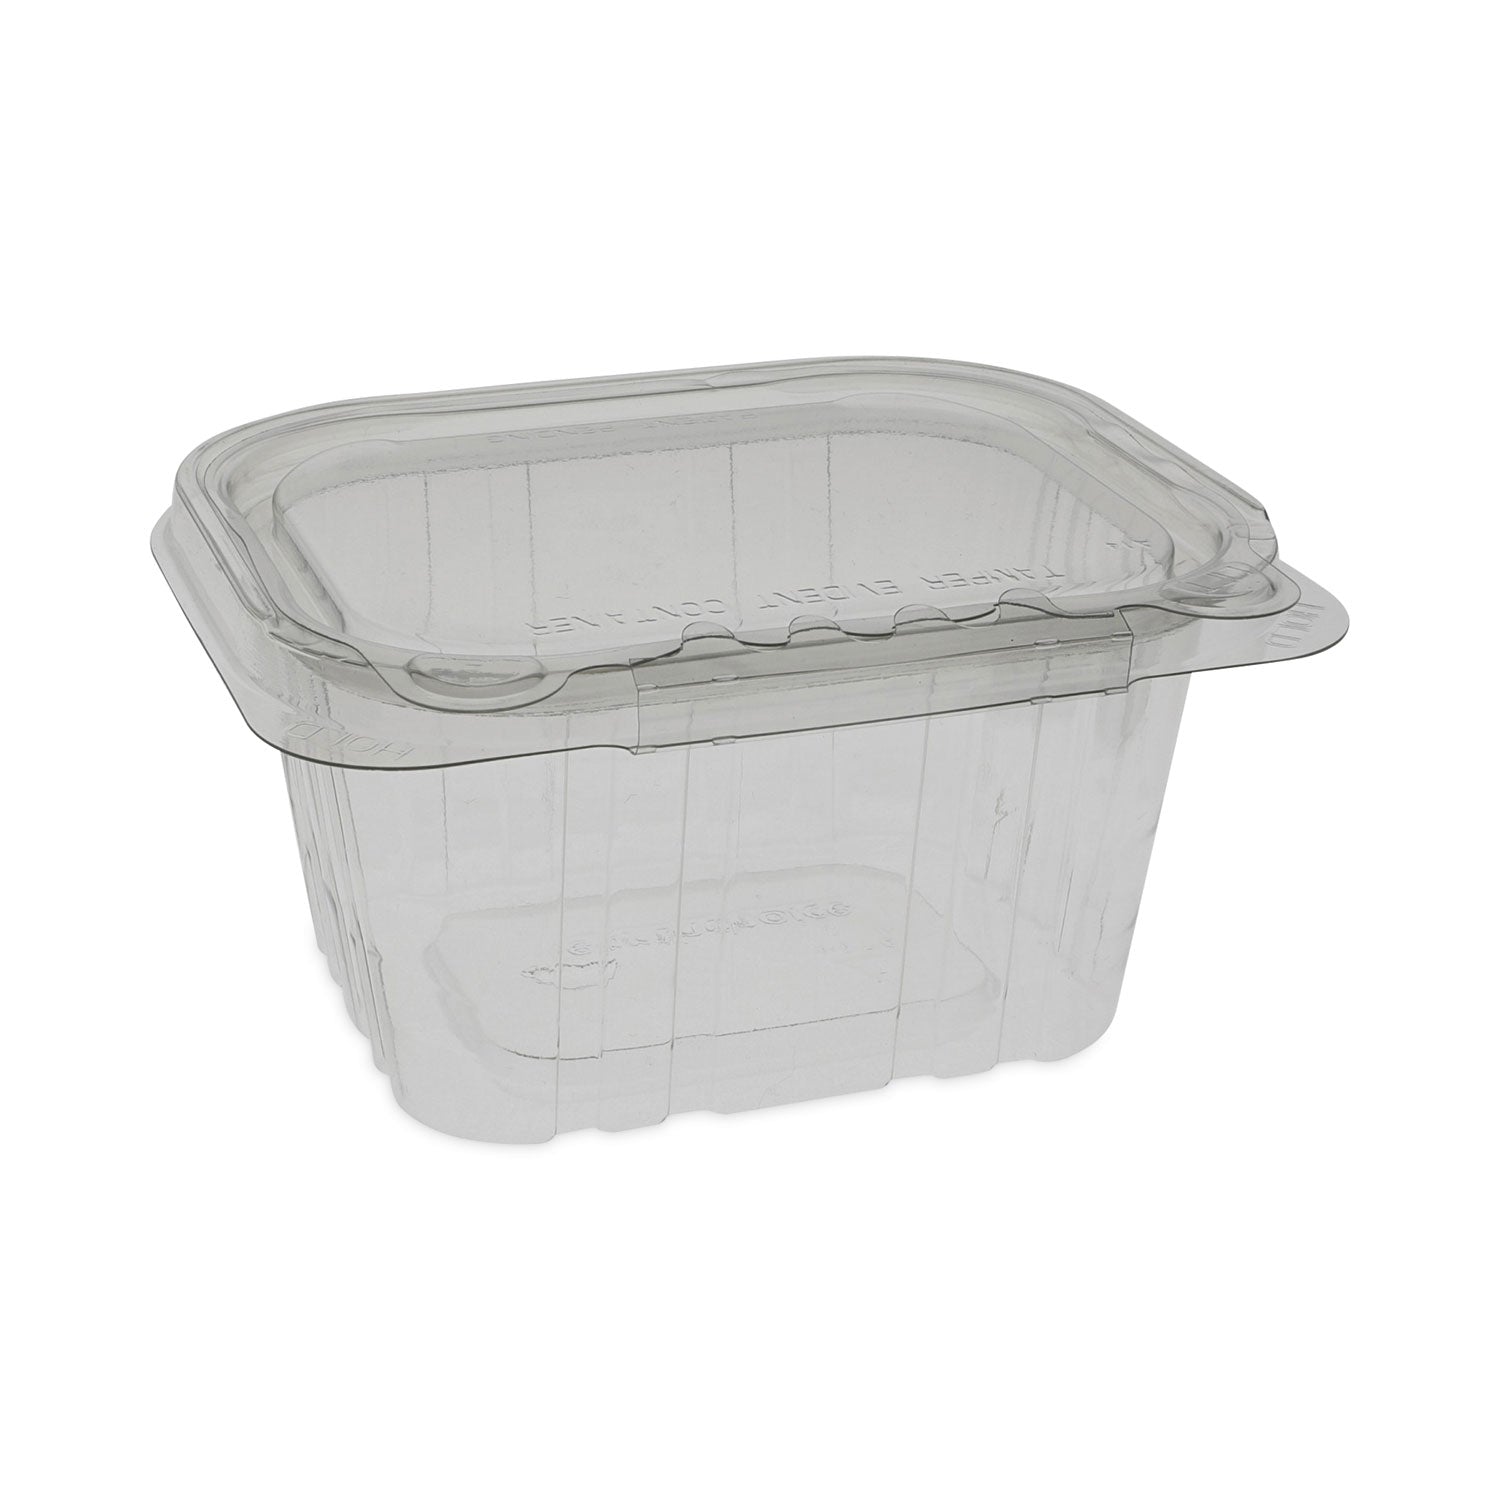 earthchoice-tamper-evident-recycled-hinged-lid-deli-container-16-oz-538-x-45-x-263-clear-plastic-304-carton_pcttehl5x416 - 1